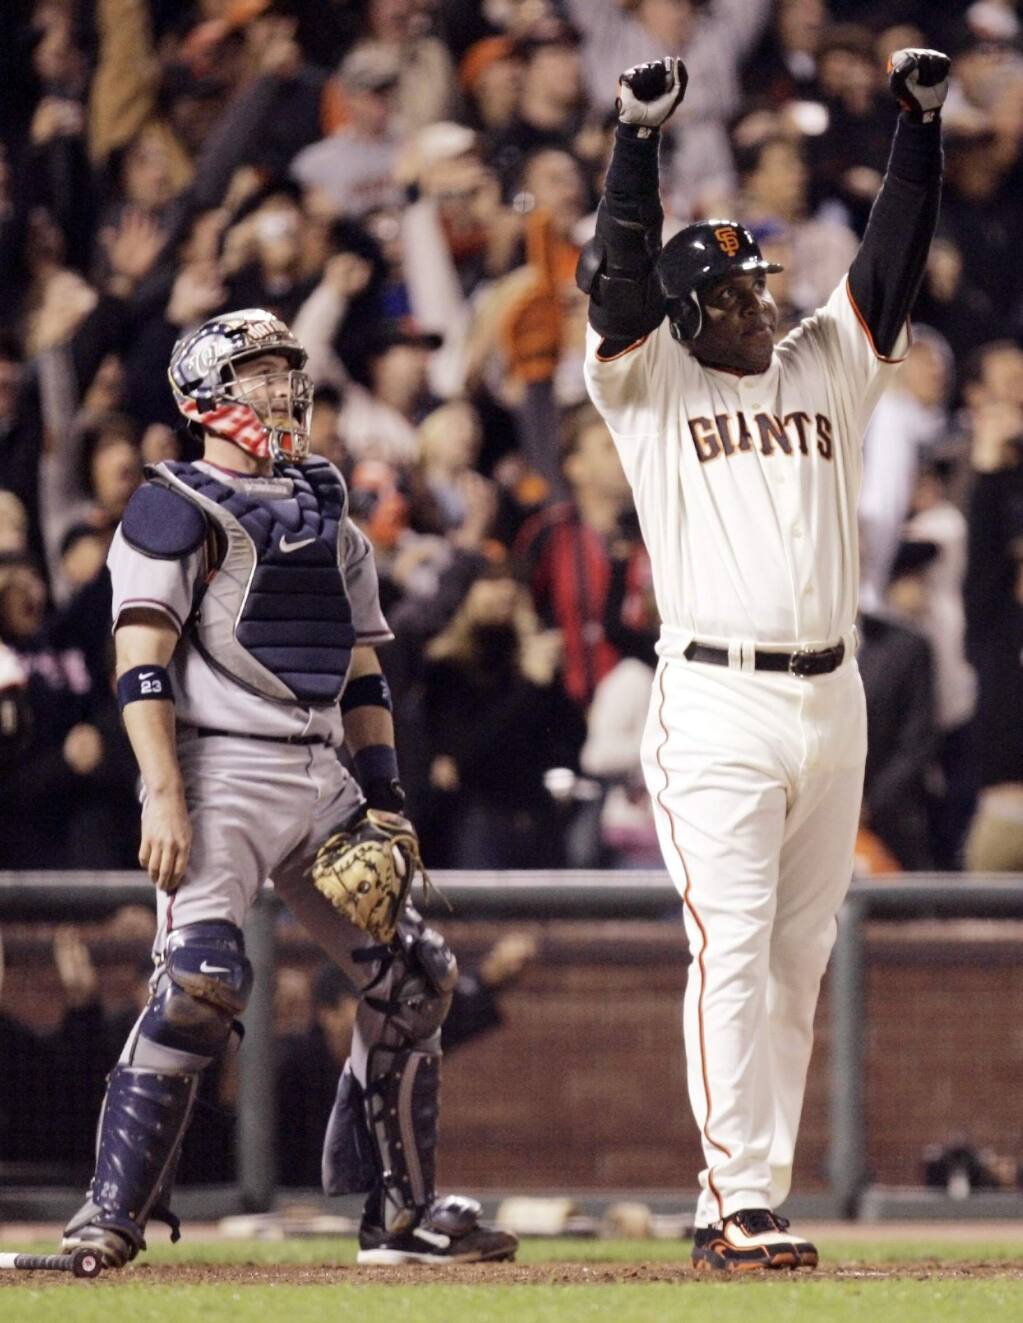 Giants to retire Barry Bonds' No. 25 in August ceremony